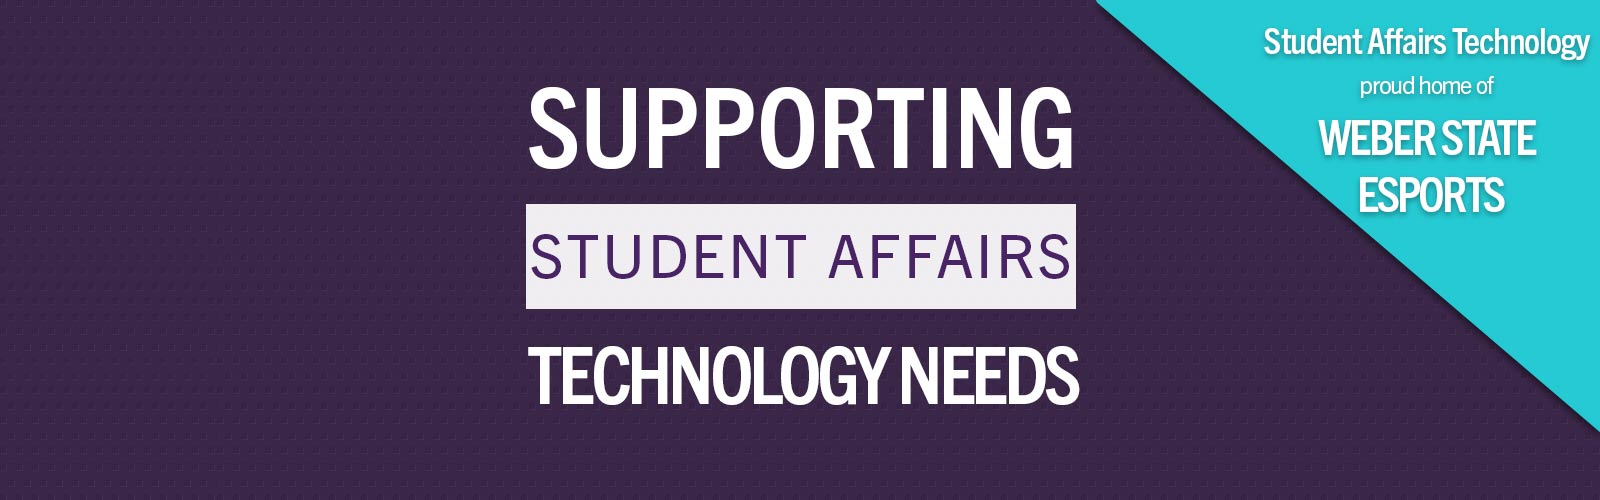 supporting student affairs technology needs